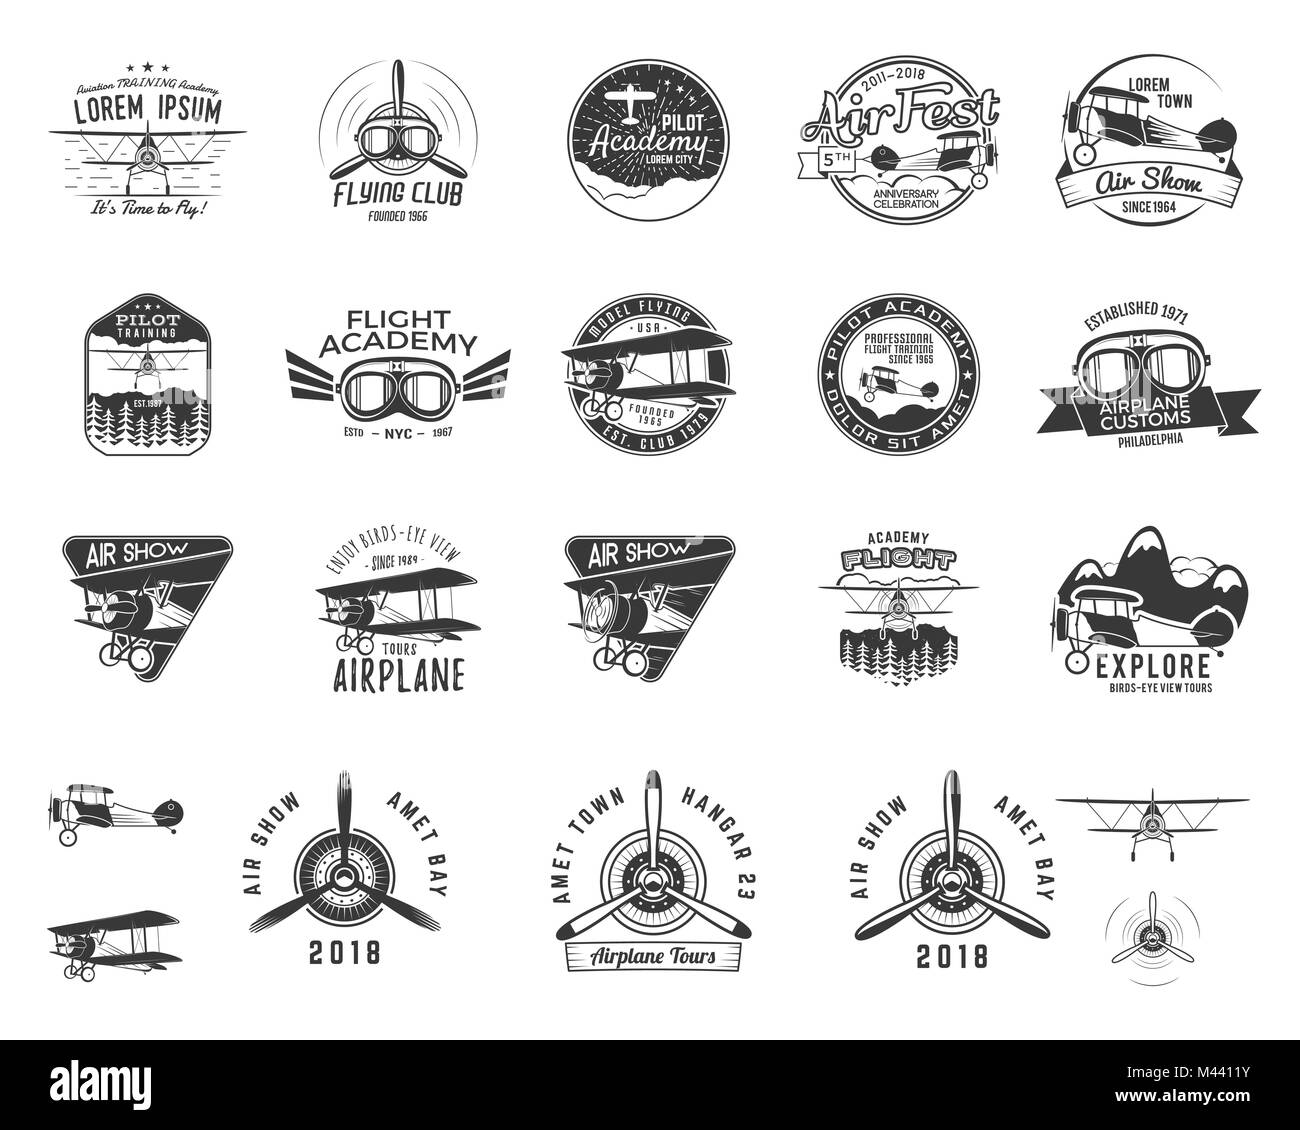 Vintage hand drawn old fly stamps. Travel or business airplane tour emblems. Biplane academy labels. Retro aerial badge isolated. Pilot school logos. Plane tee design, prints, web design. Stock vector Stock Vector